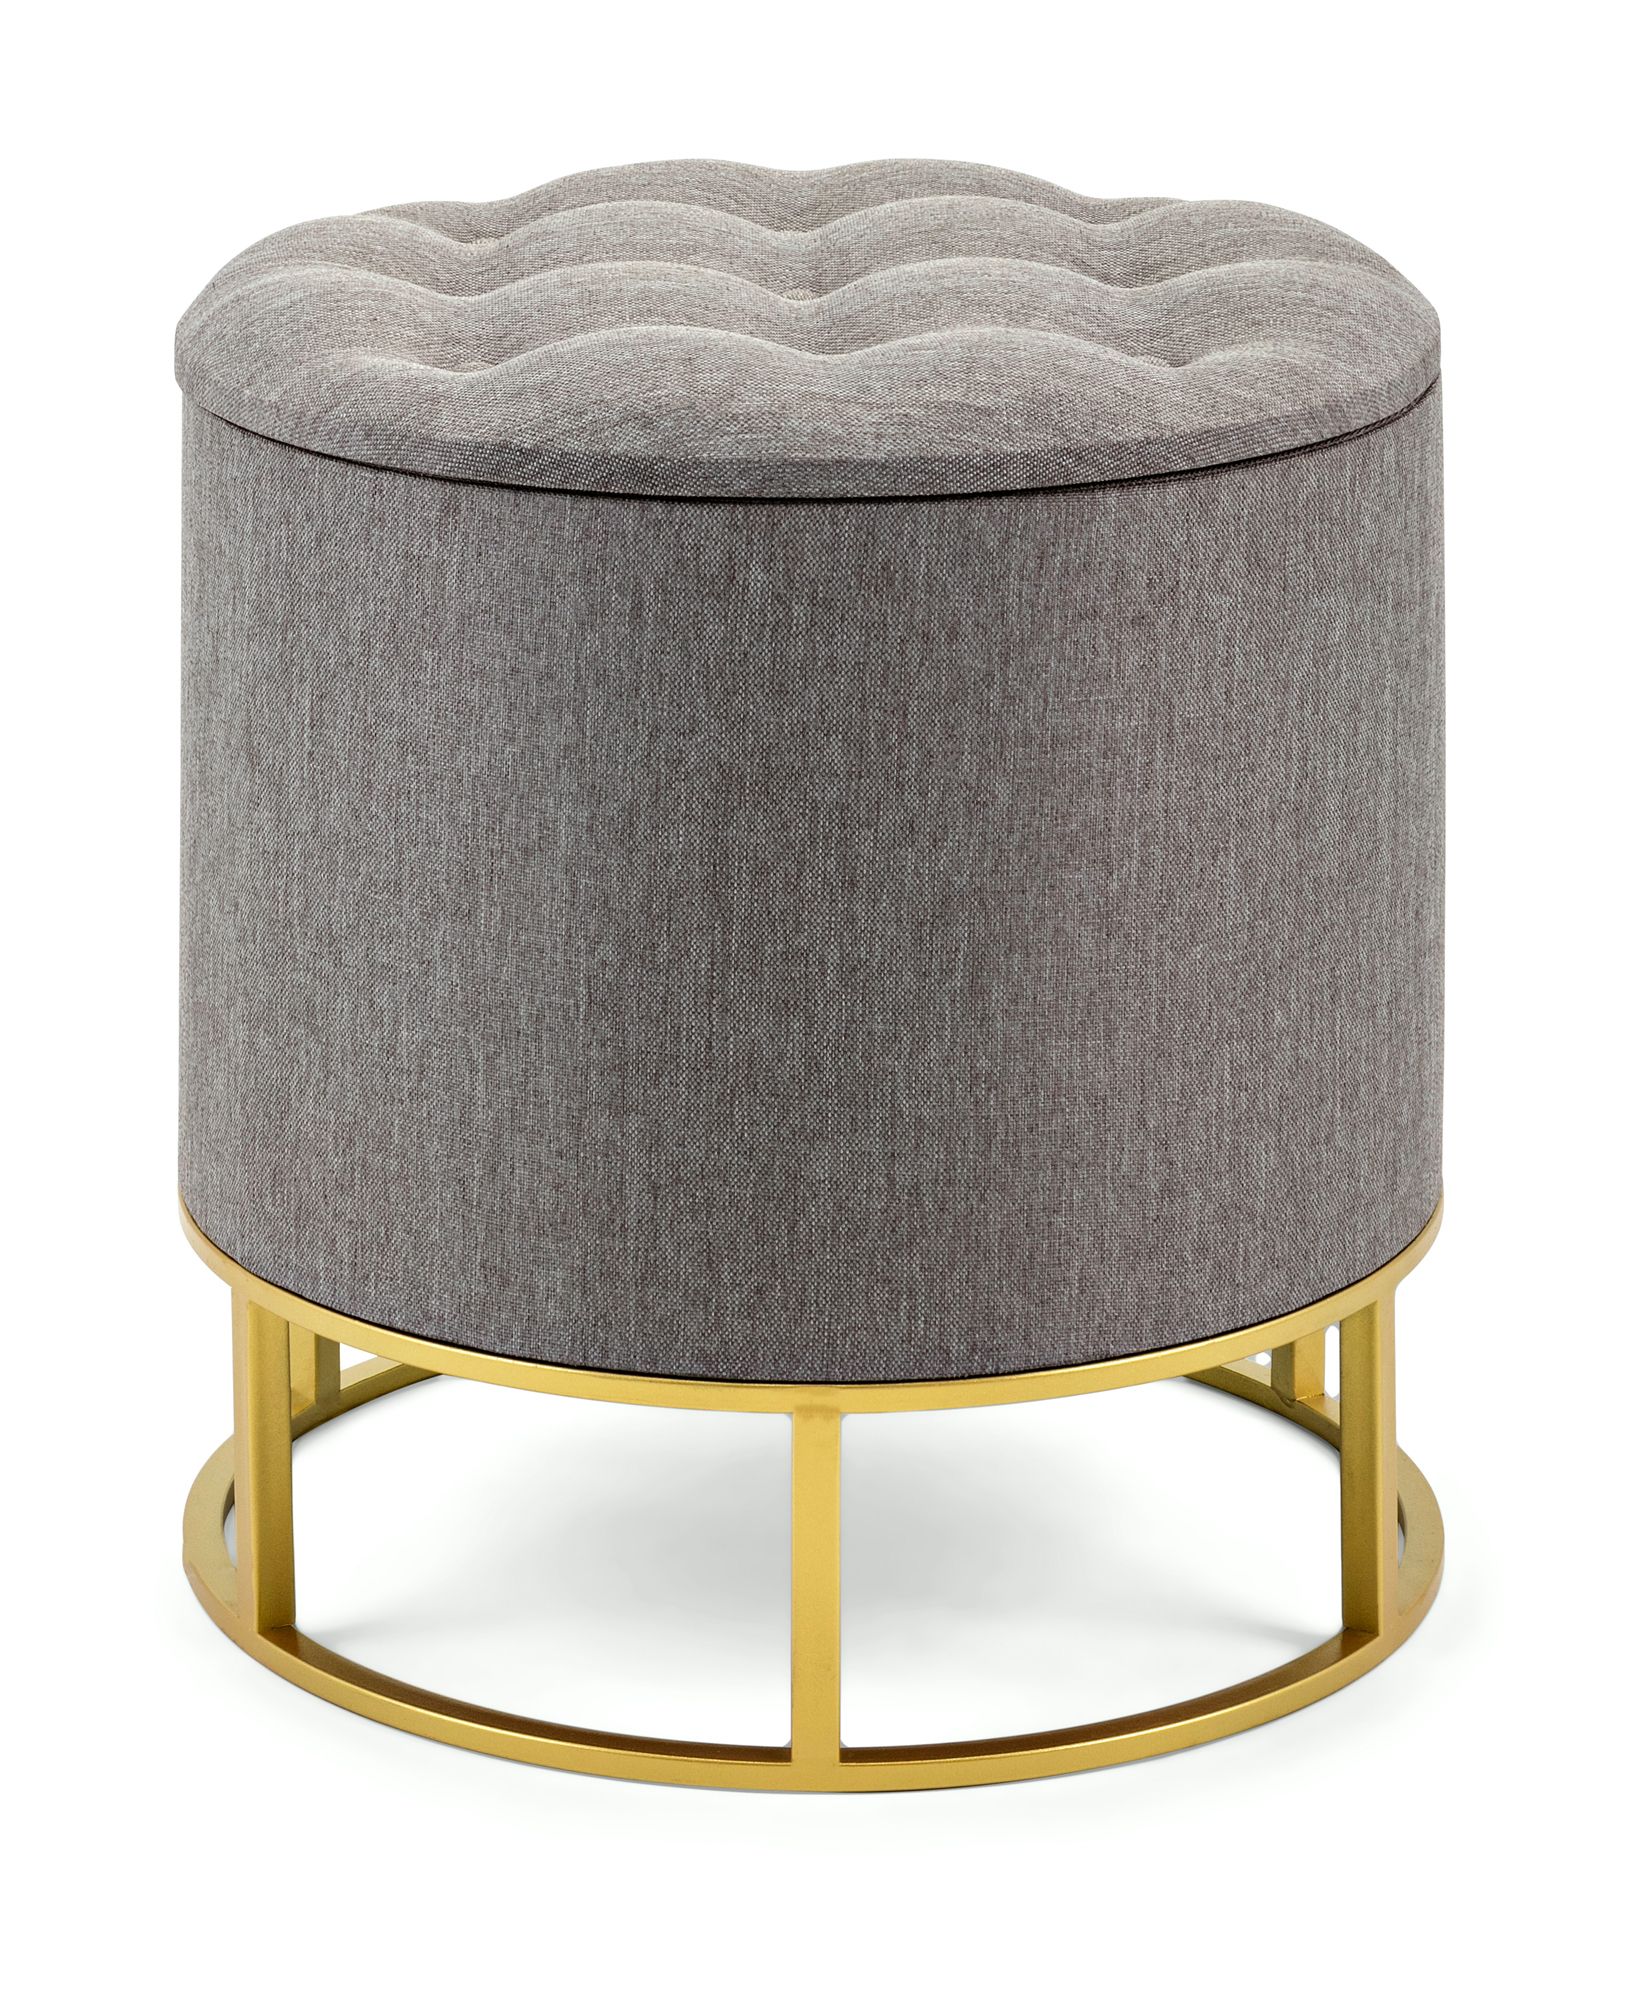 19" Gray Tufted Linen And Brass Finished Ottoman With Storage – Walmart Pertaining To Gray Velvet Tufted Storage Ottomans (View 11 of 20)